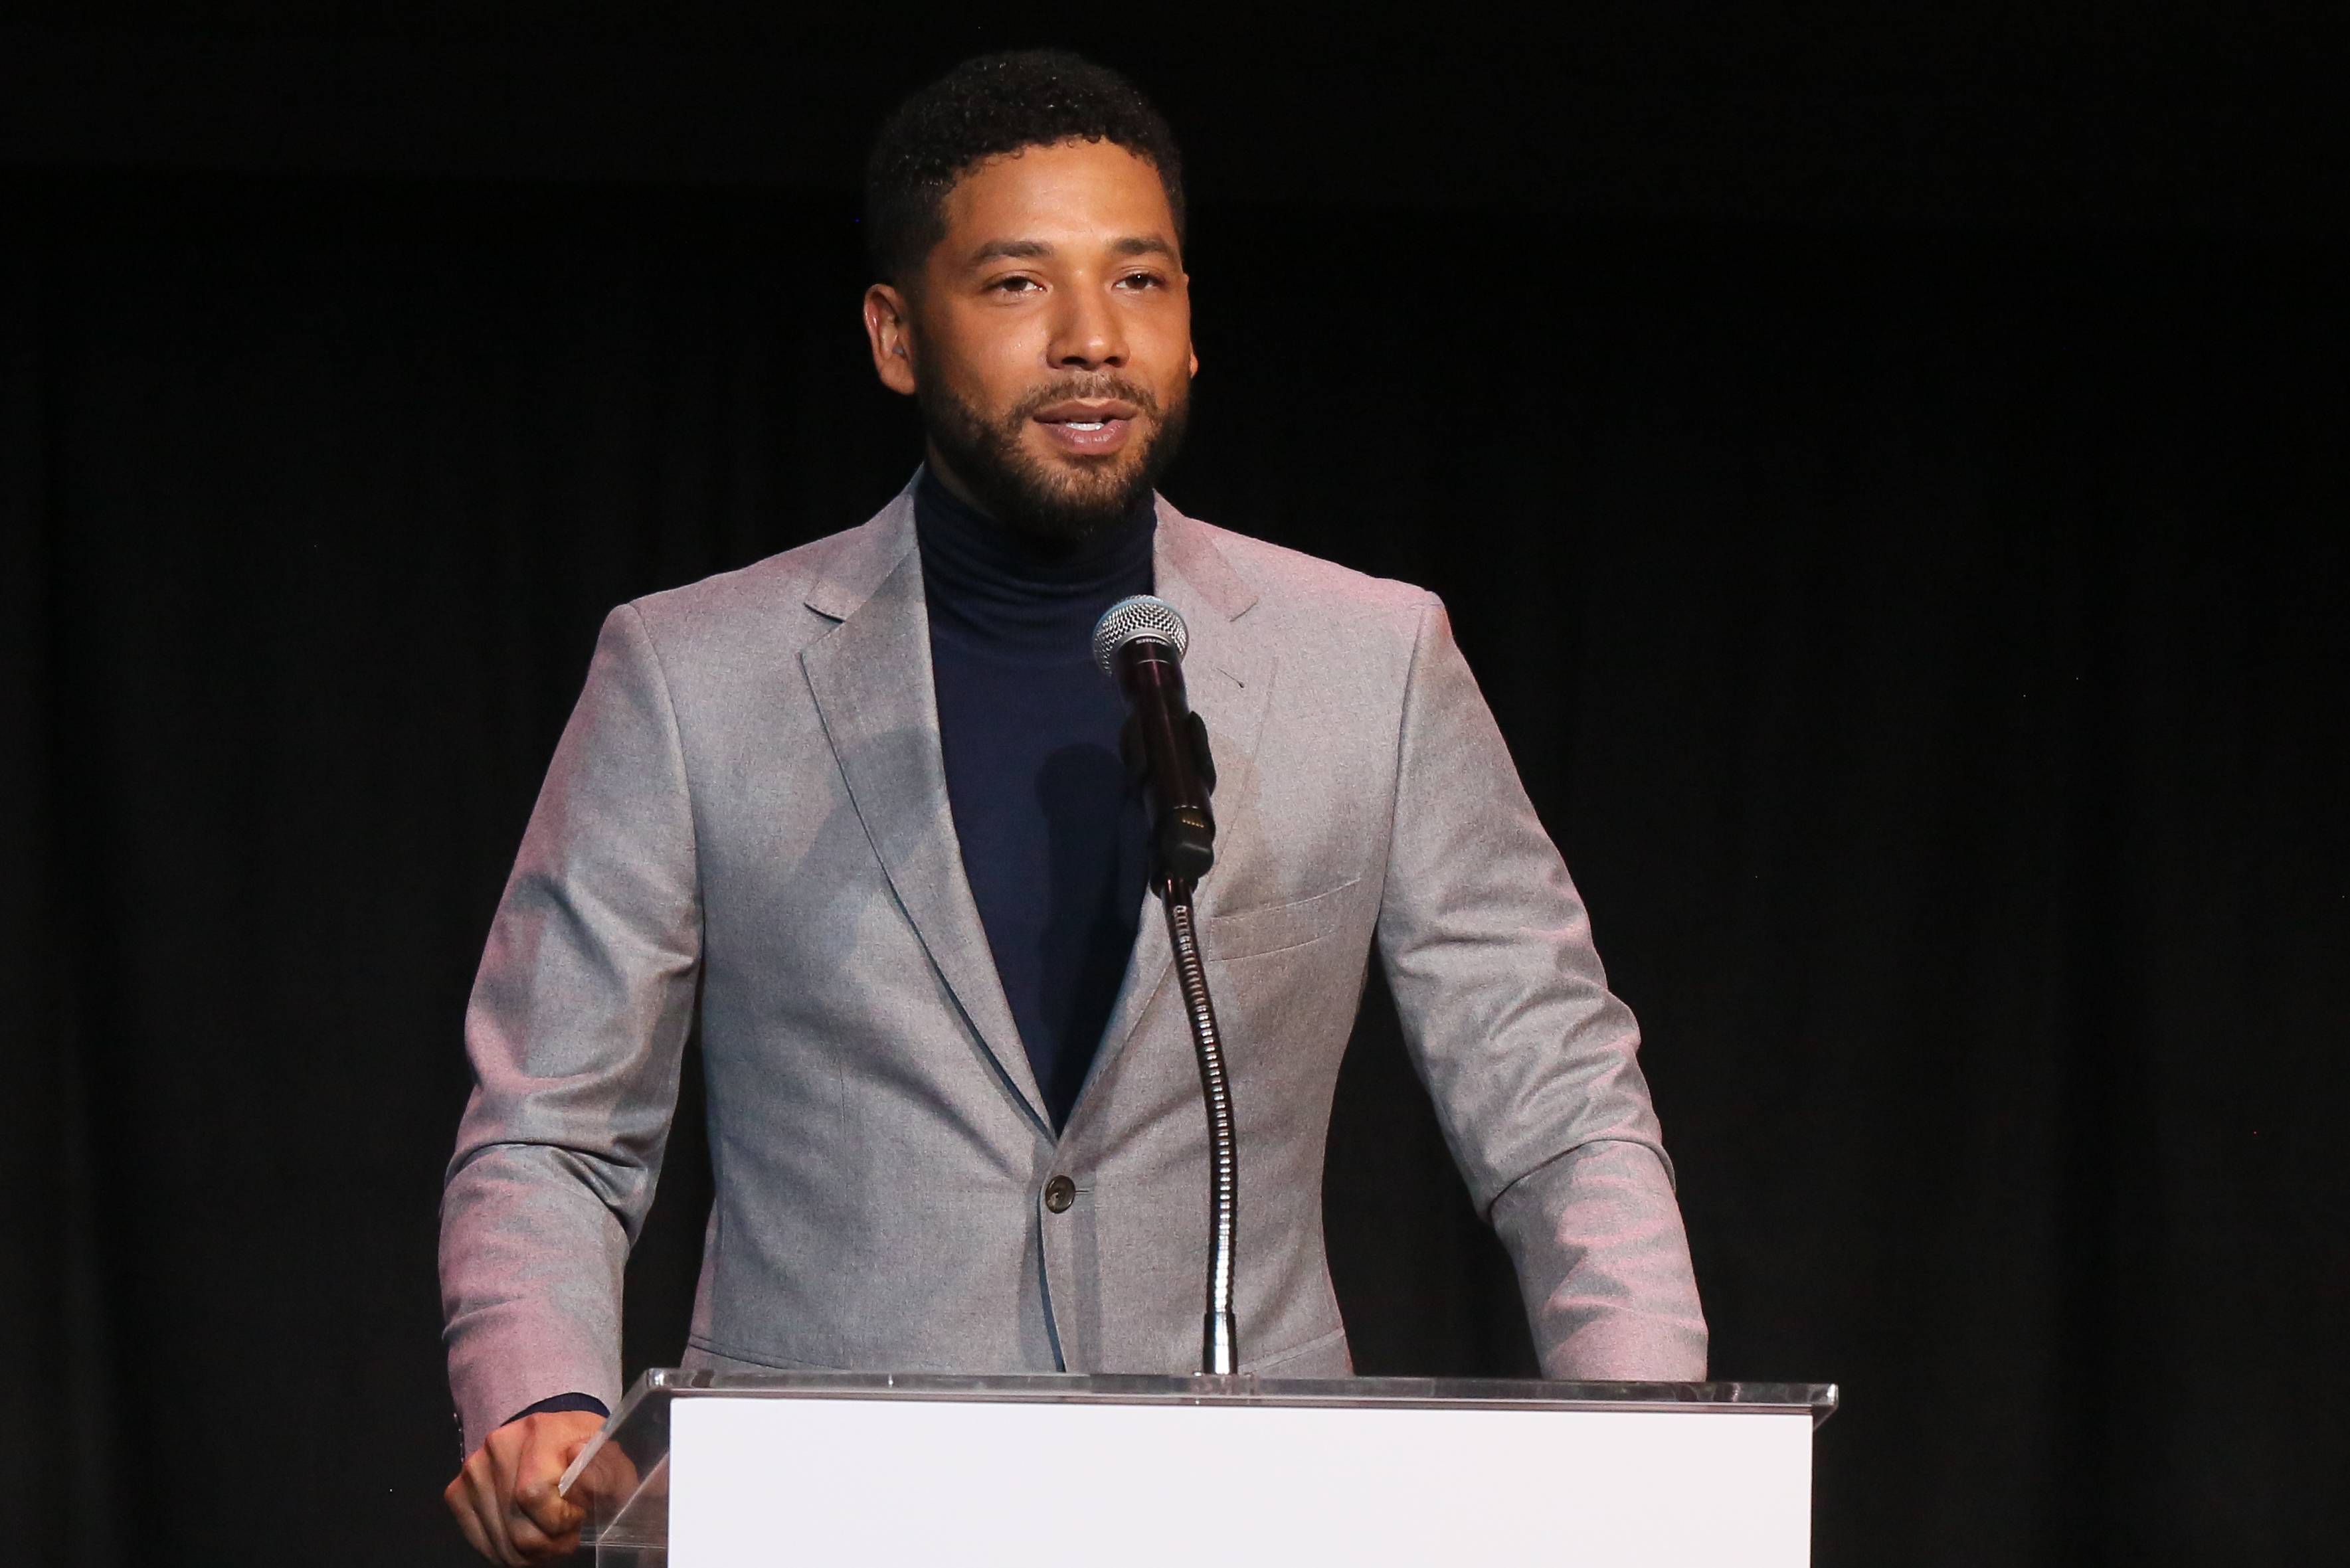 ‘How Can You Not Believe This?’: Jussie Smollett Is ‘Pissed’ Over Rumors Around Attack